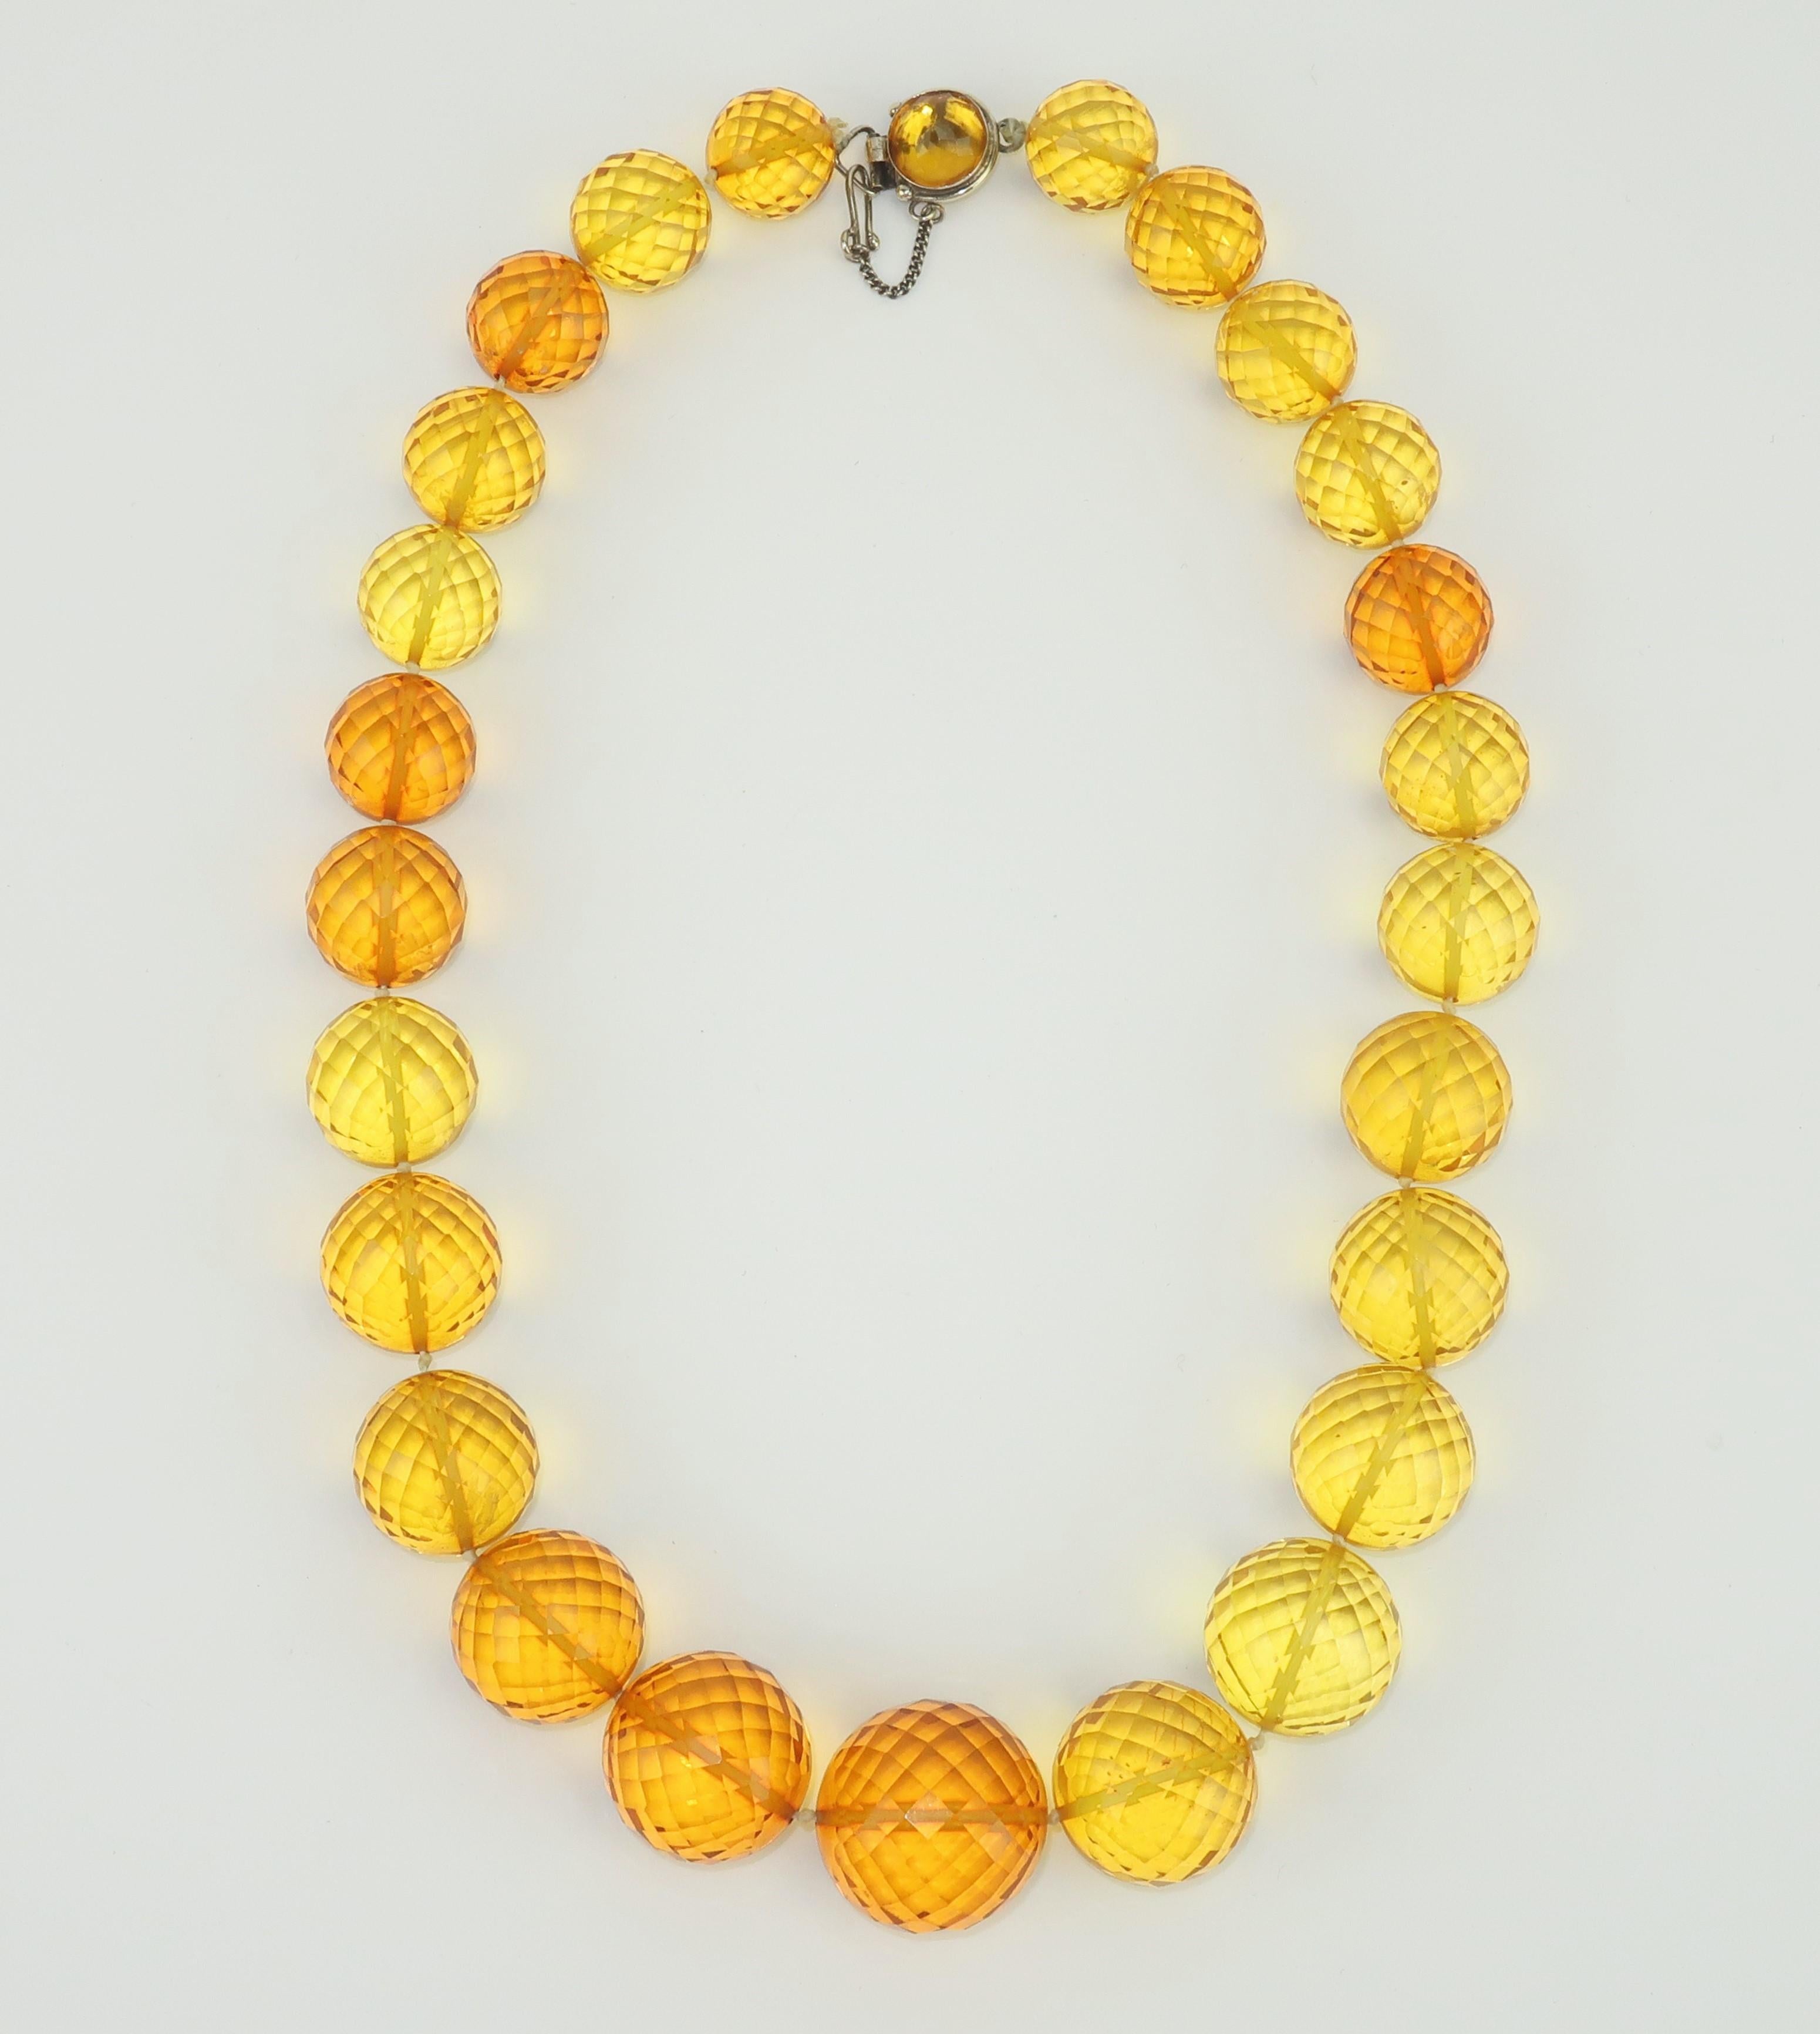 Vintage amber faceted acrylic bead necklace with a sterling silver clasp closure.  The faceted beads are graduated in size and offer a wonderful glow with a semi-transparent appearance.  The sterling silver slide clasp has an unusual safety hook and